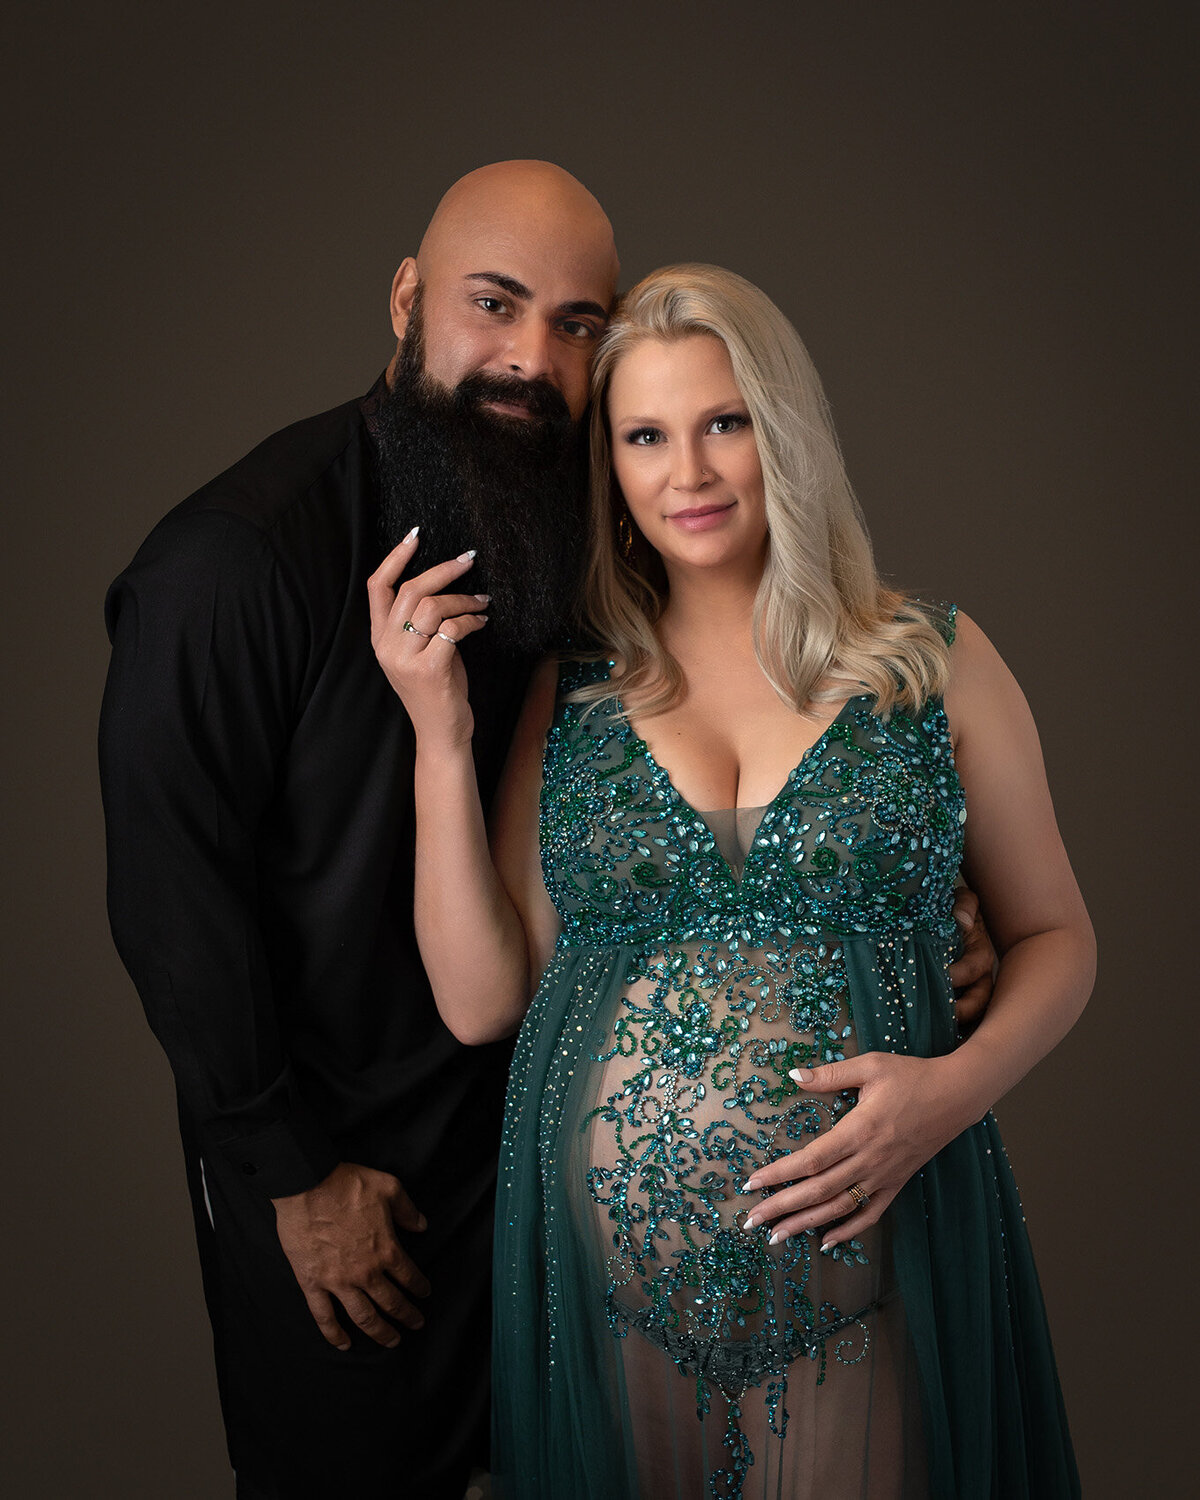 Stunning couple expecting their first baby in Houston, Texas. Mom is wearing an emerald green couture gown. Dad is wearing an  India n kurta in black.